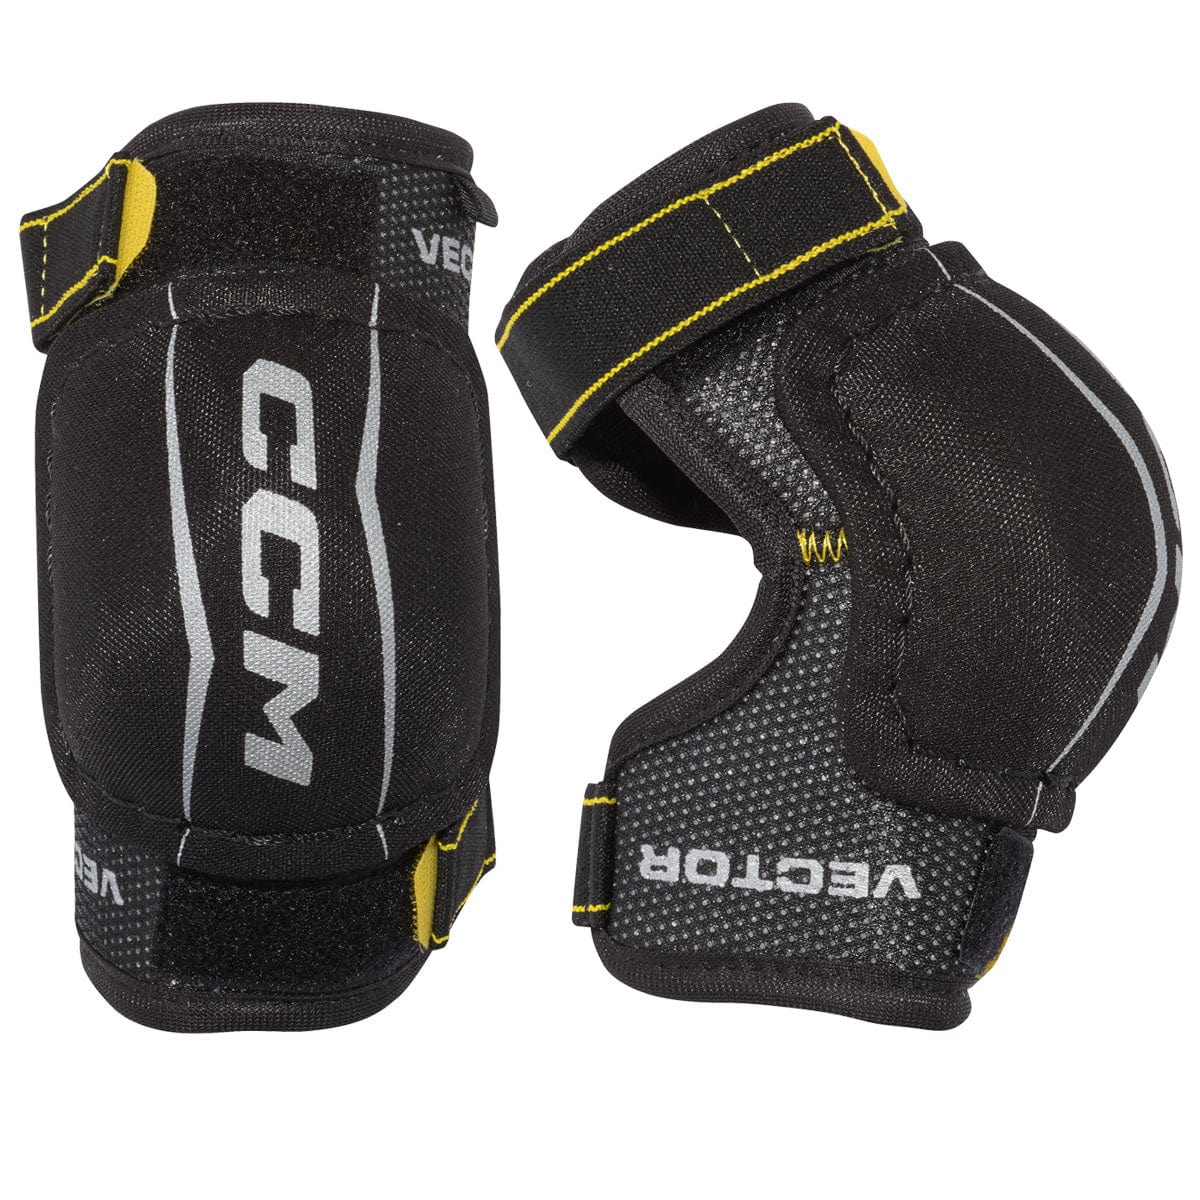 CCM Tacks Vector Youth Hockey Elbow Pads - The Hockey Shop Source For Sports